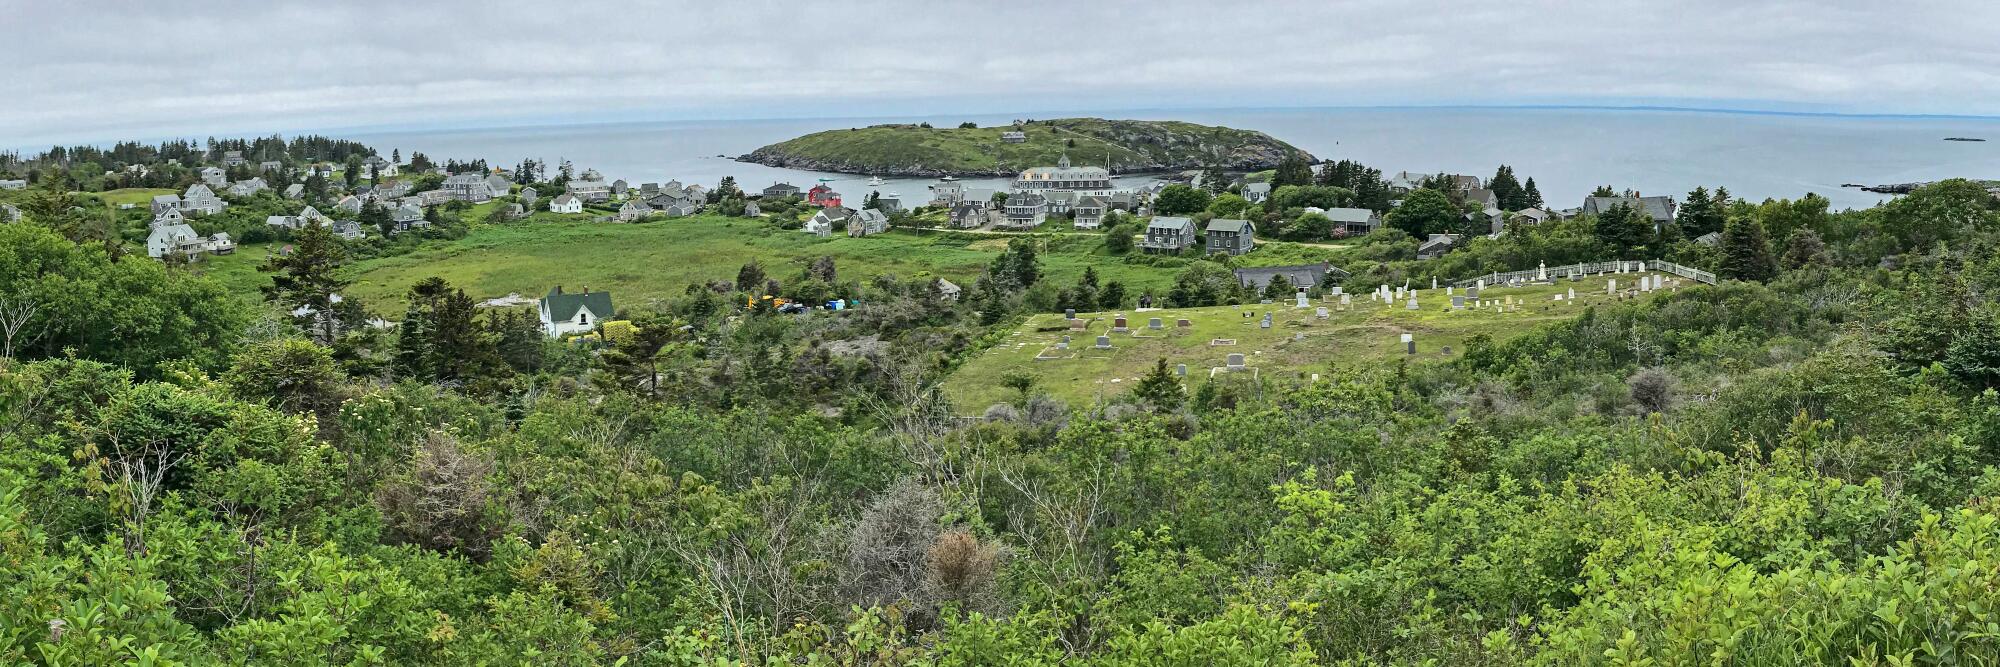 Monhegan Island, Maine, with a landscape of trees, homes and the ocean.